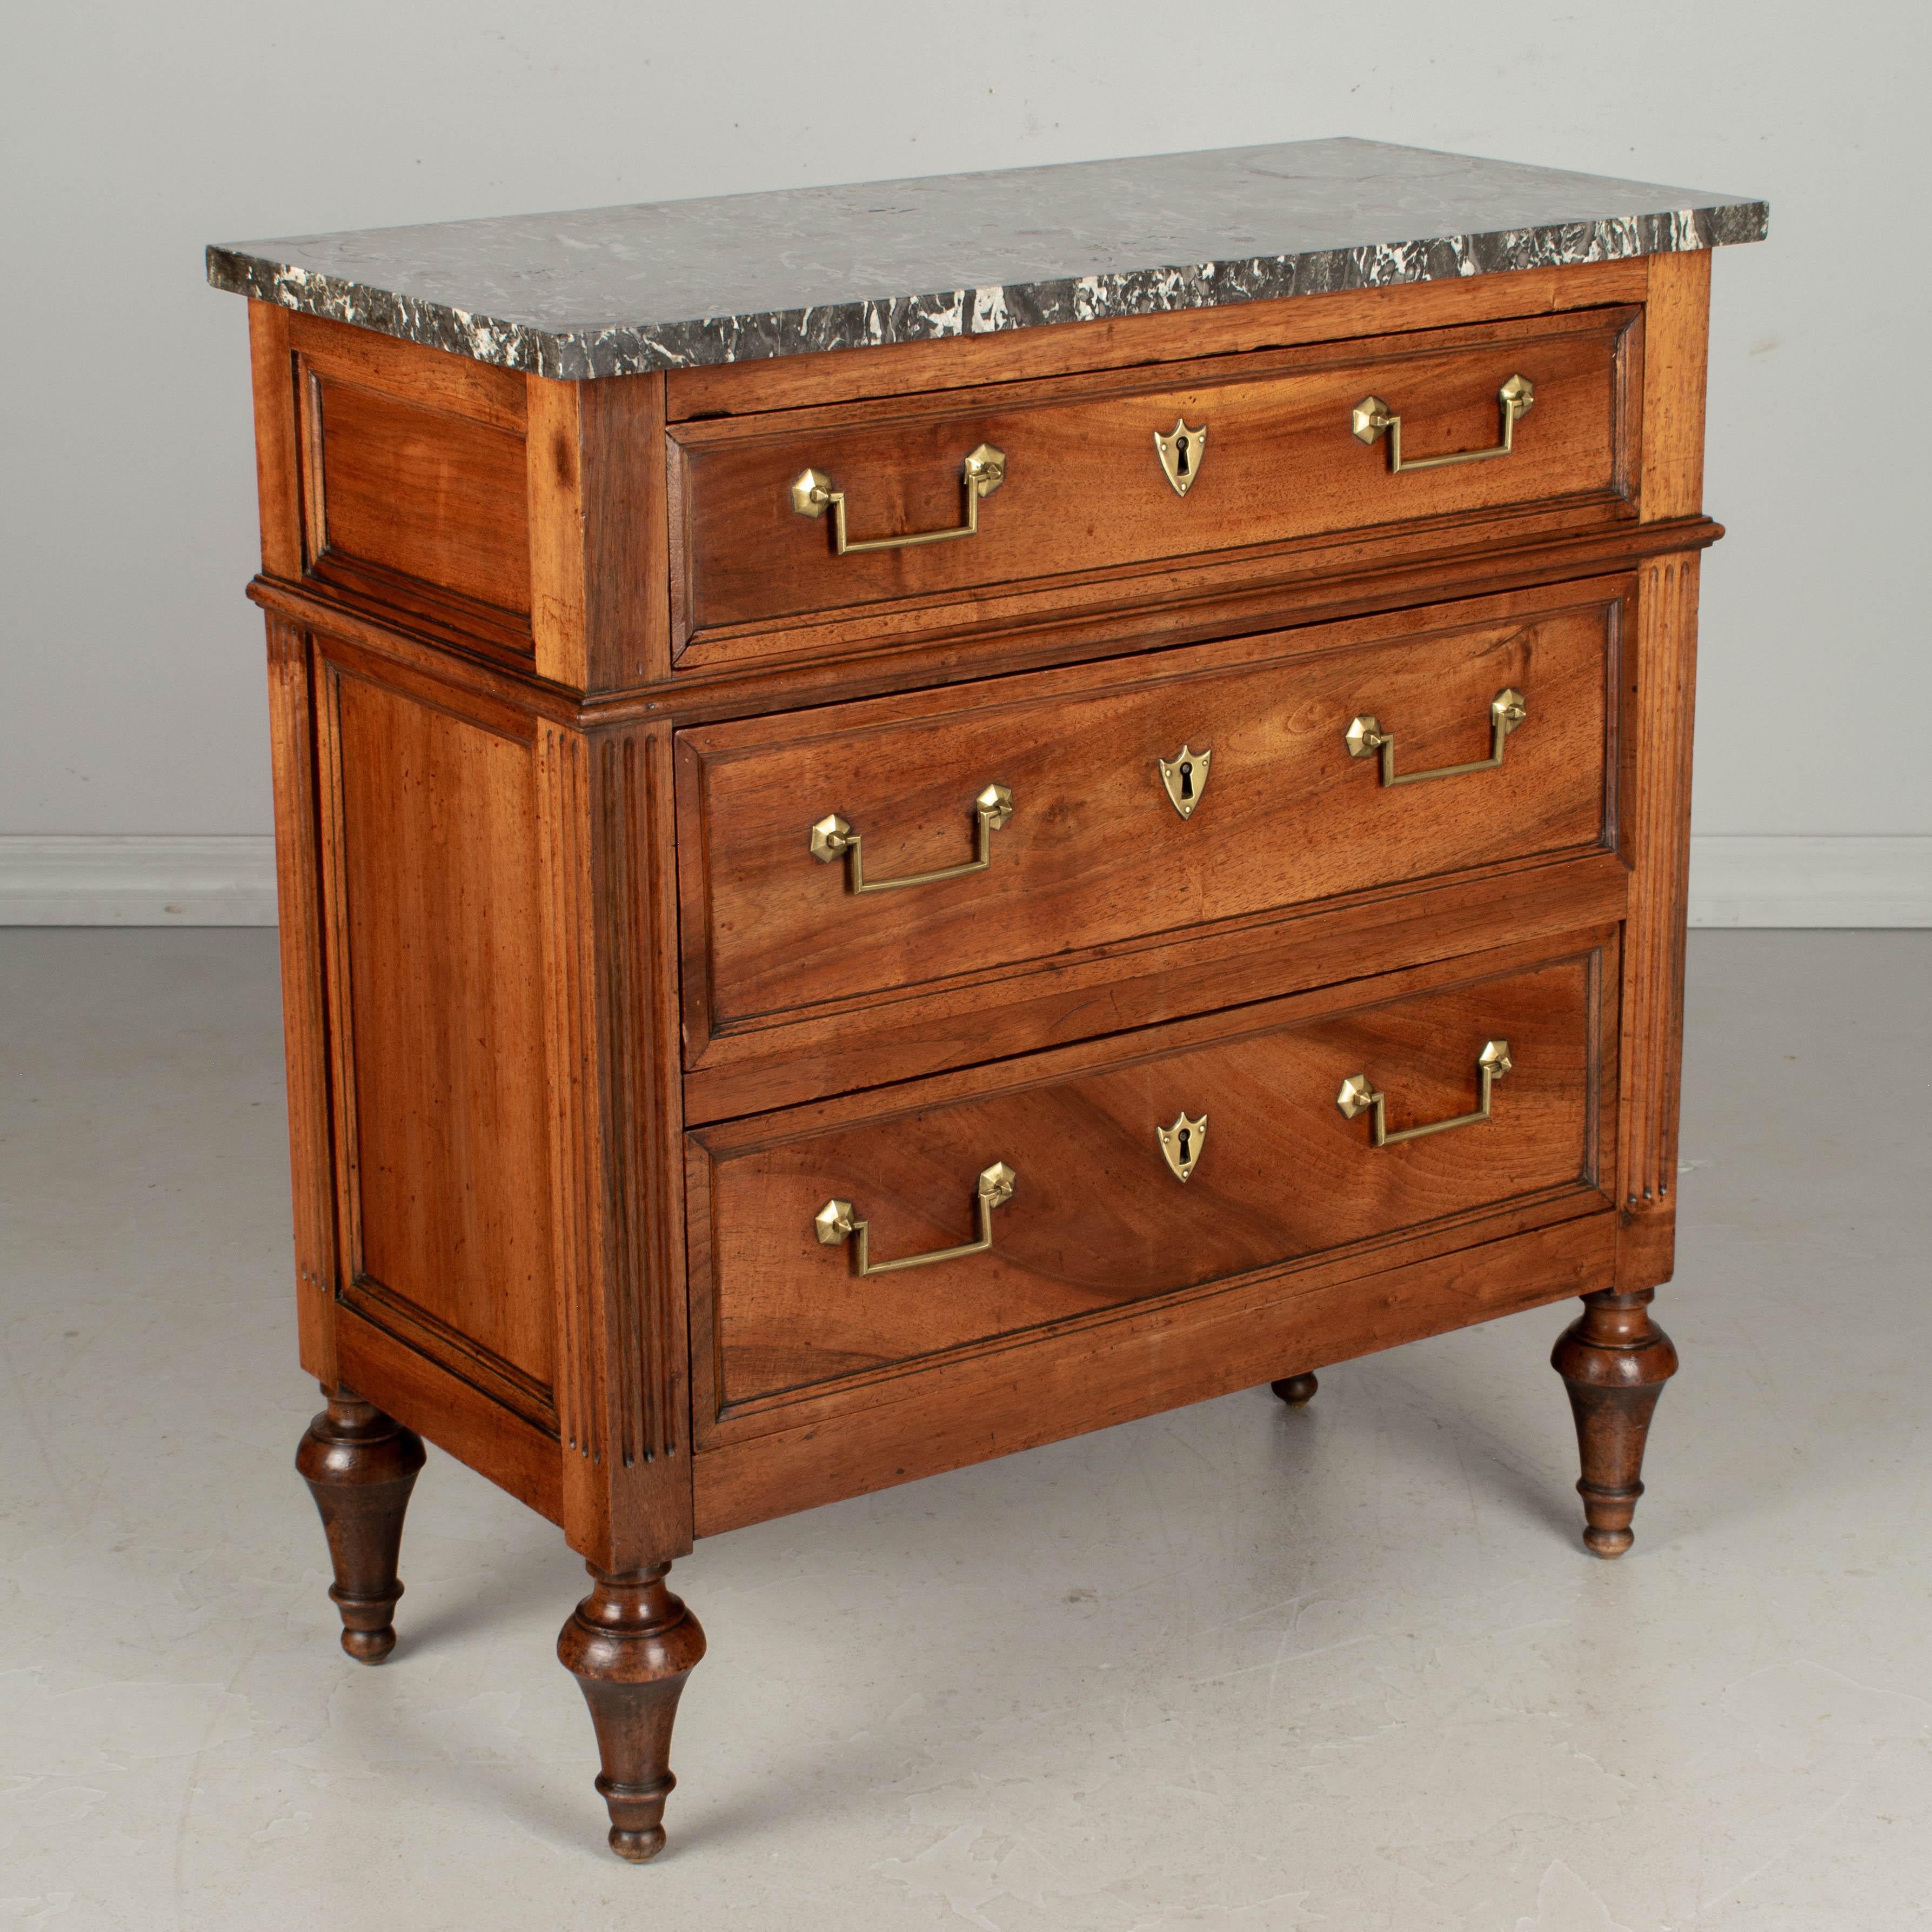 A fine 19th century Louis XVI French commode, or chest of drawers, made of solid walnut with gray St. Anne marble top. Three dovetailed drawers with original brass hardware and locks, but no keys. Subtle details include paneled sides, fluted front